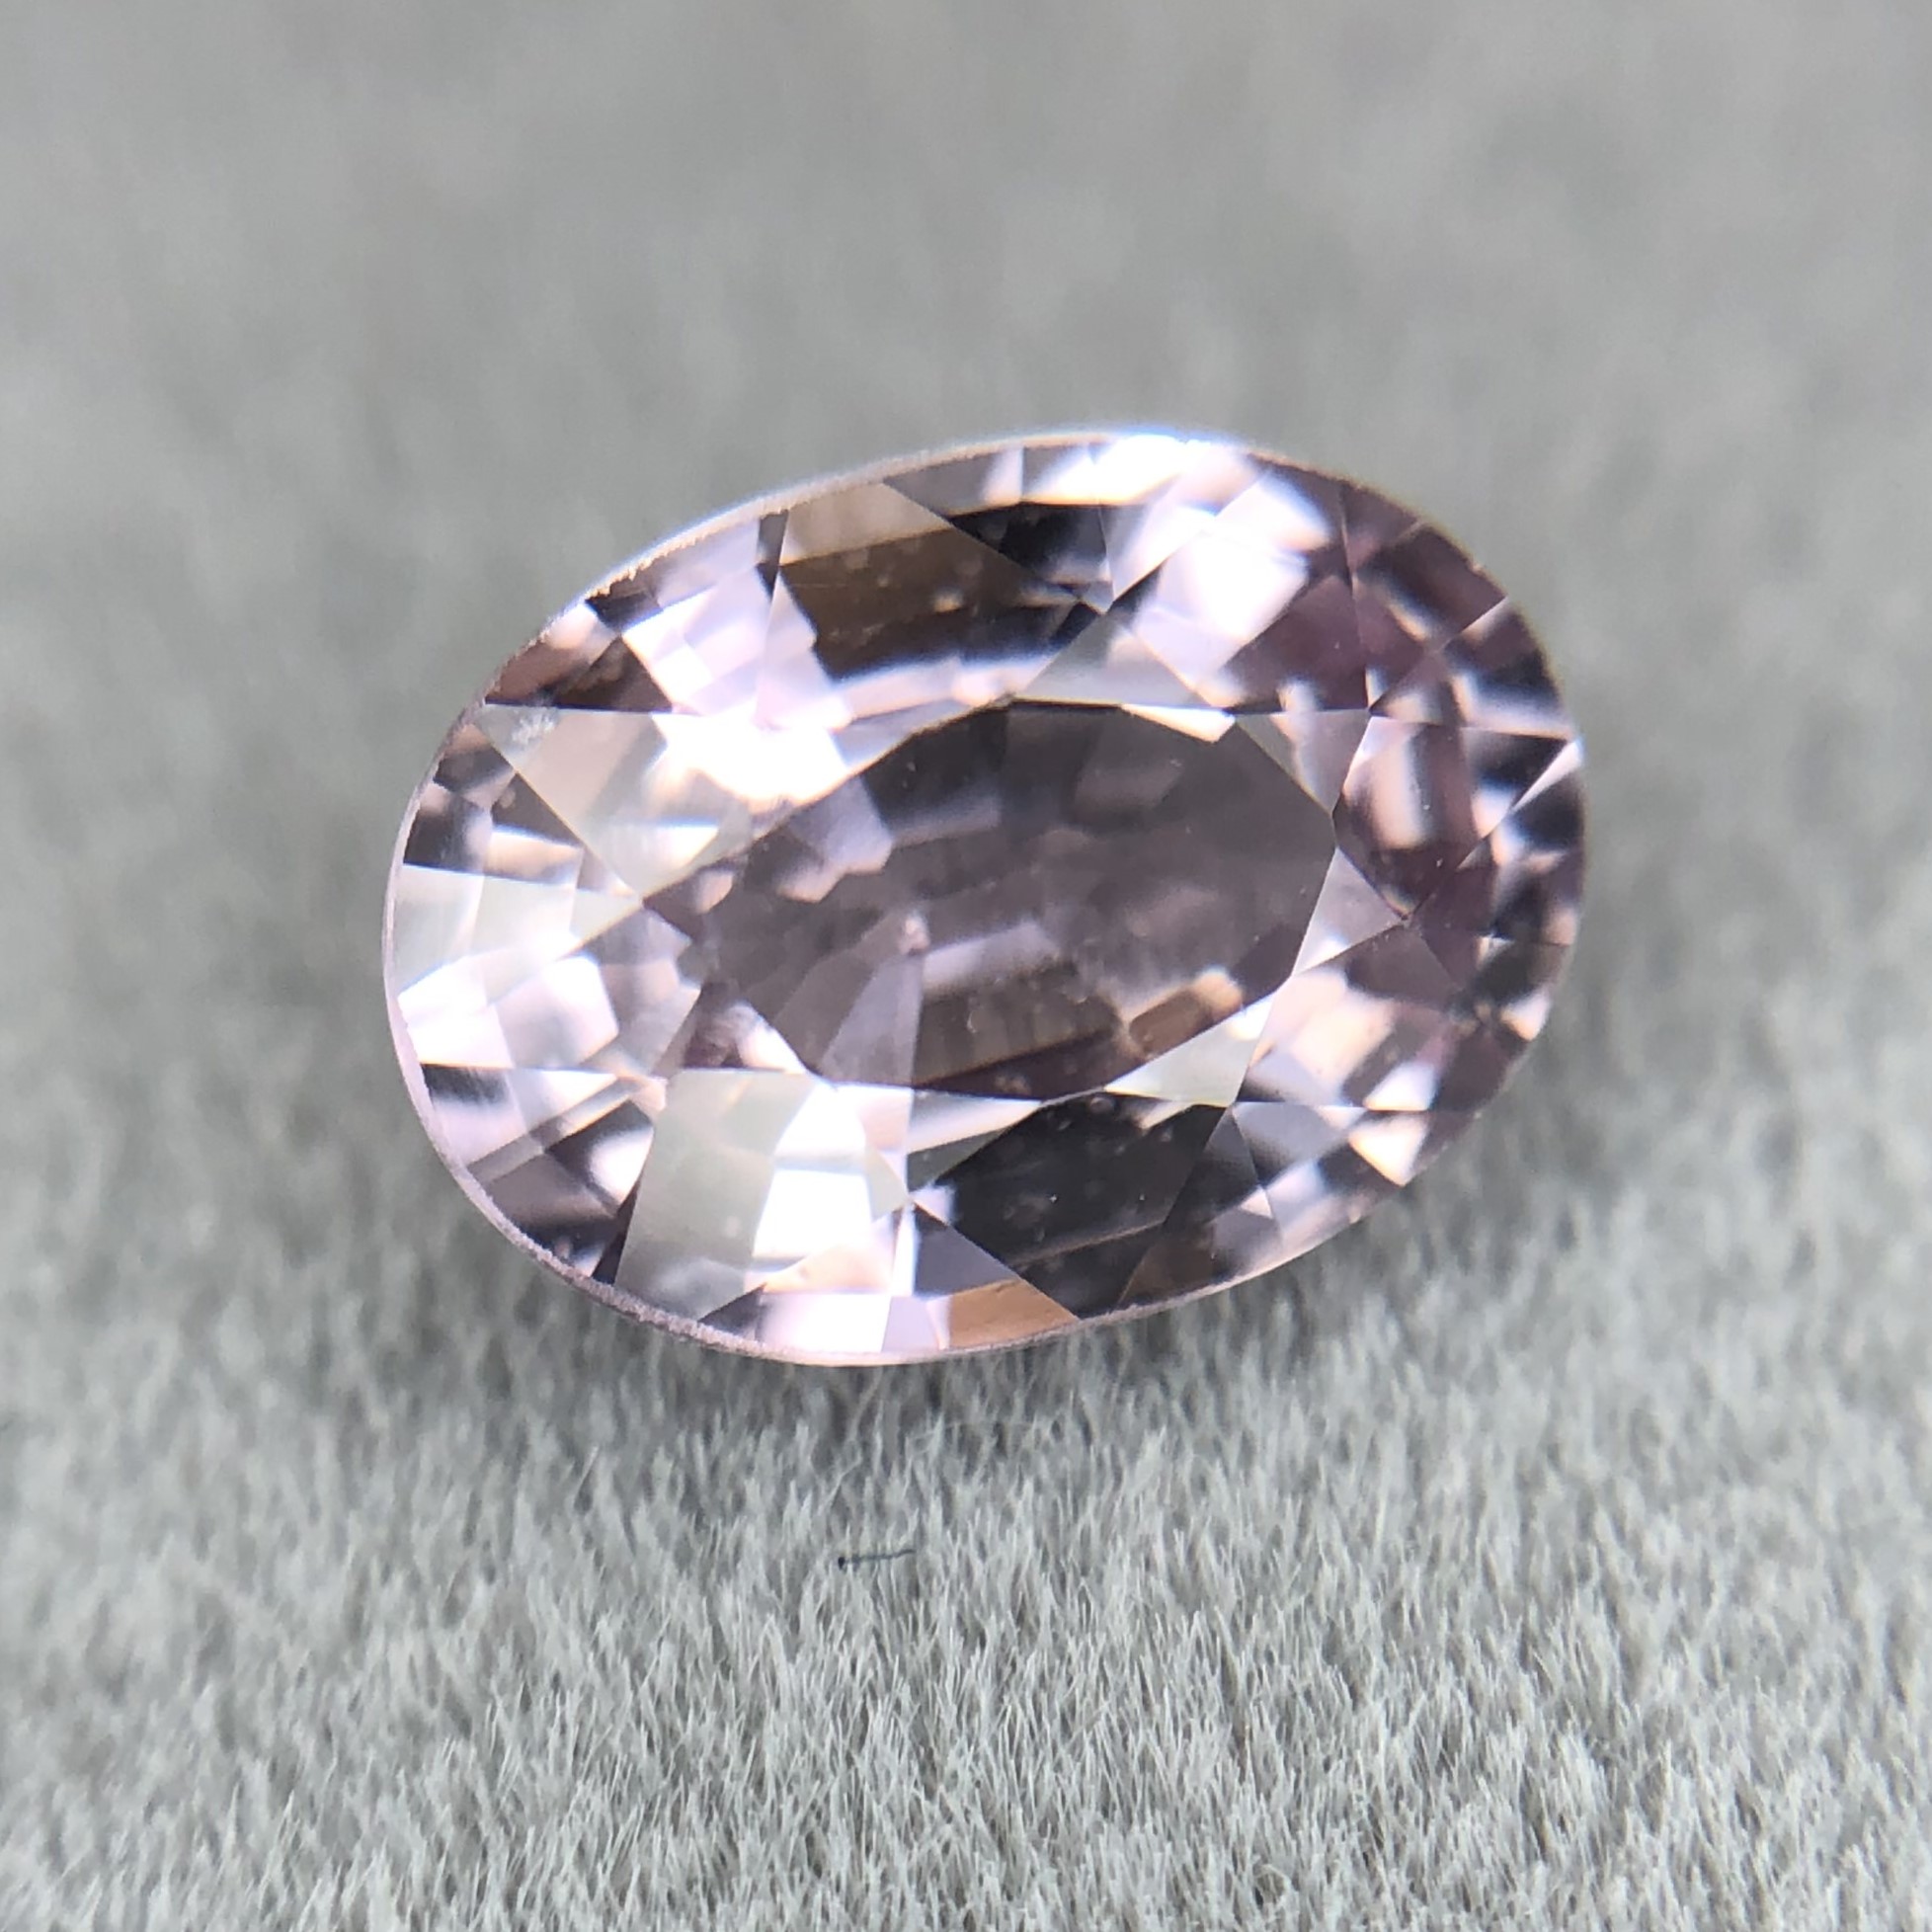 1.65ct Oval Mixed Cut Sapphire